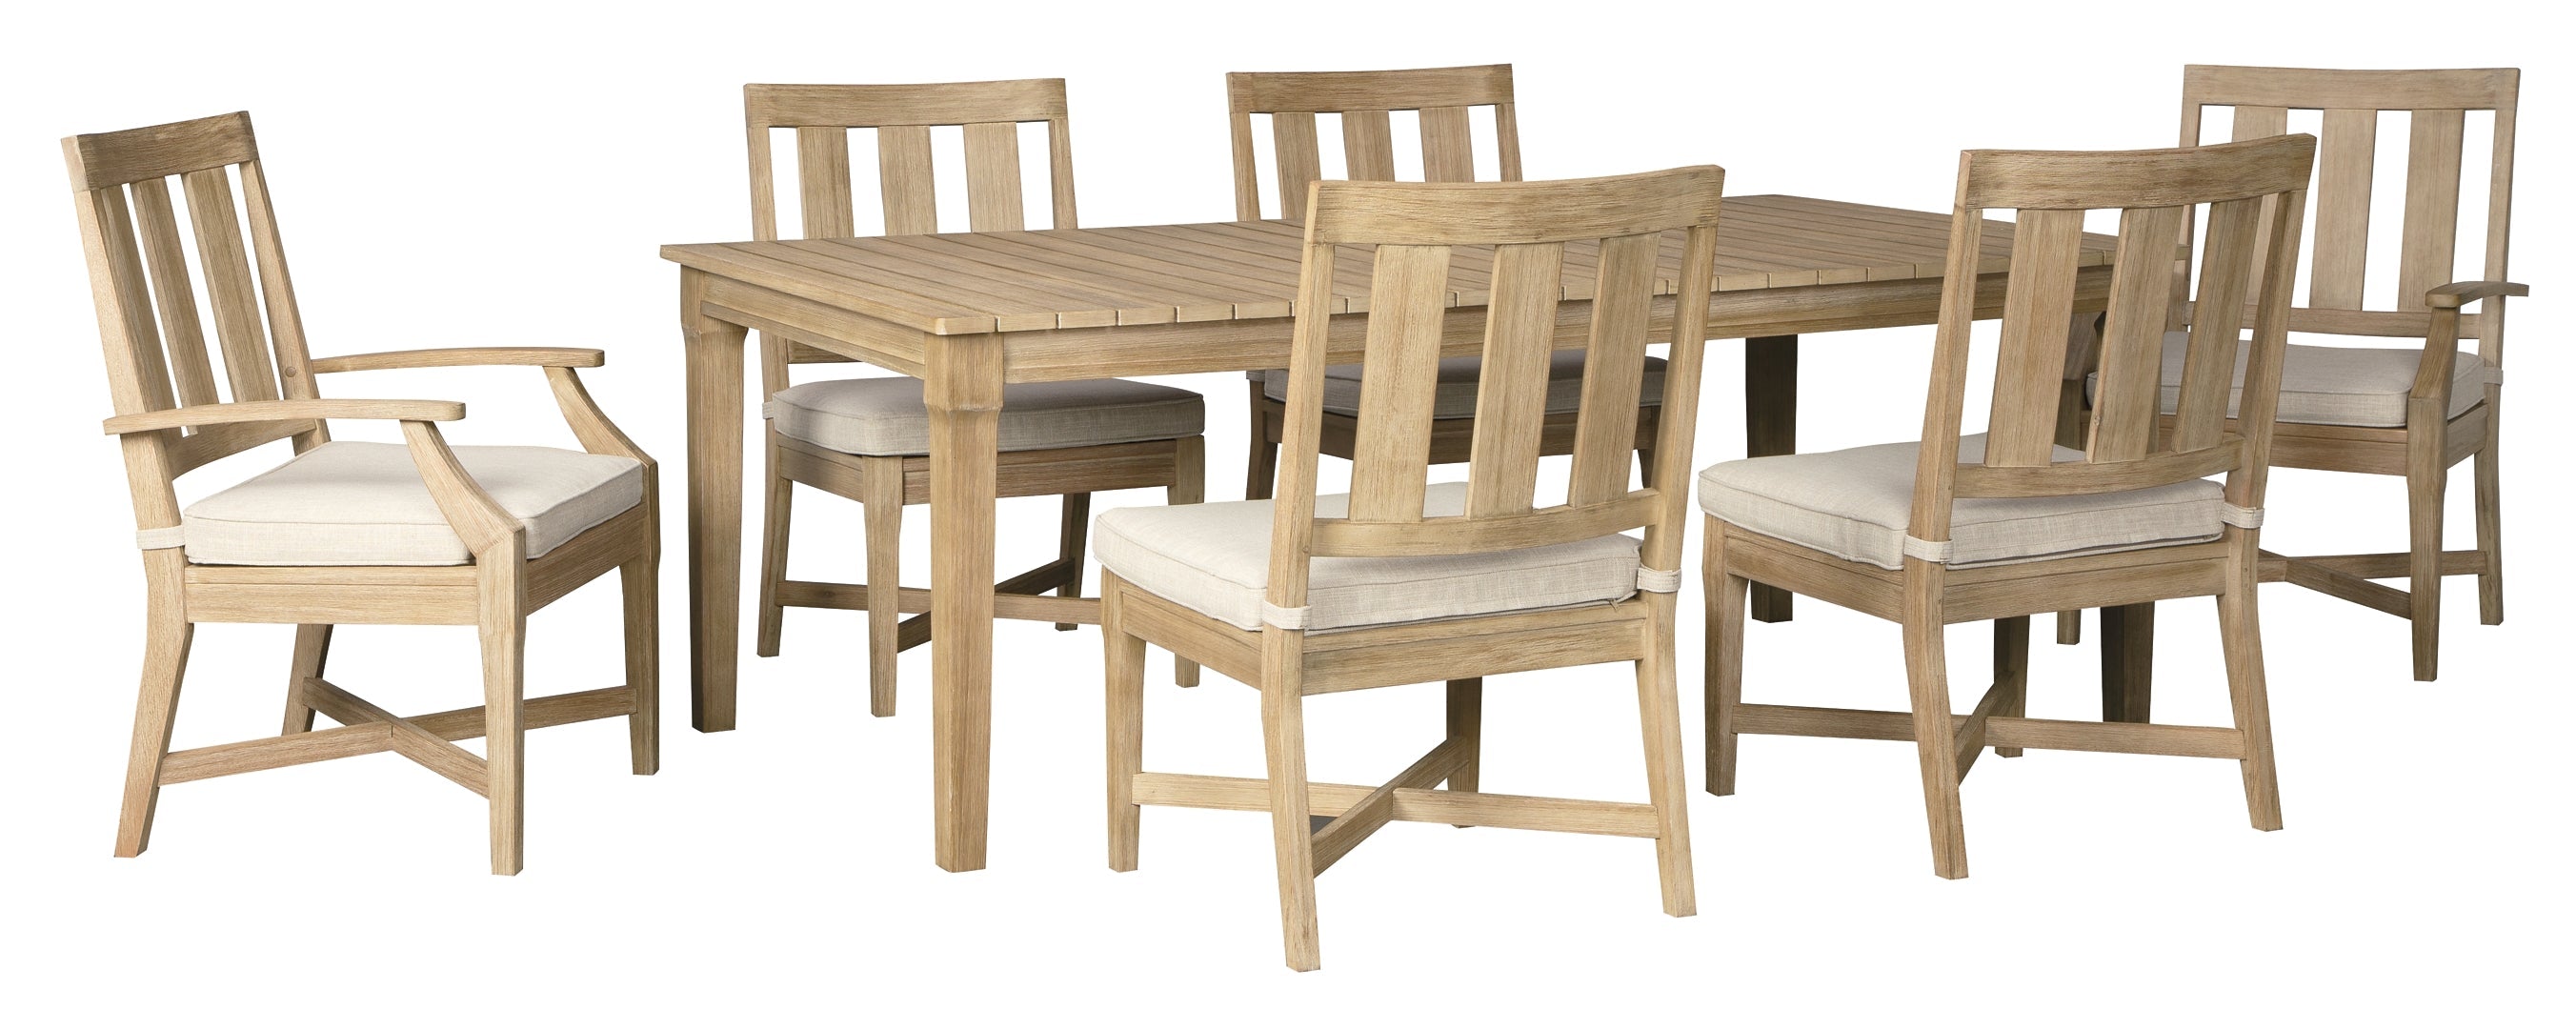 Clare View Outdoor Dining Table and 6 Chairs